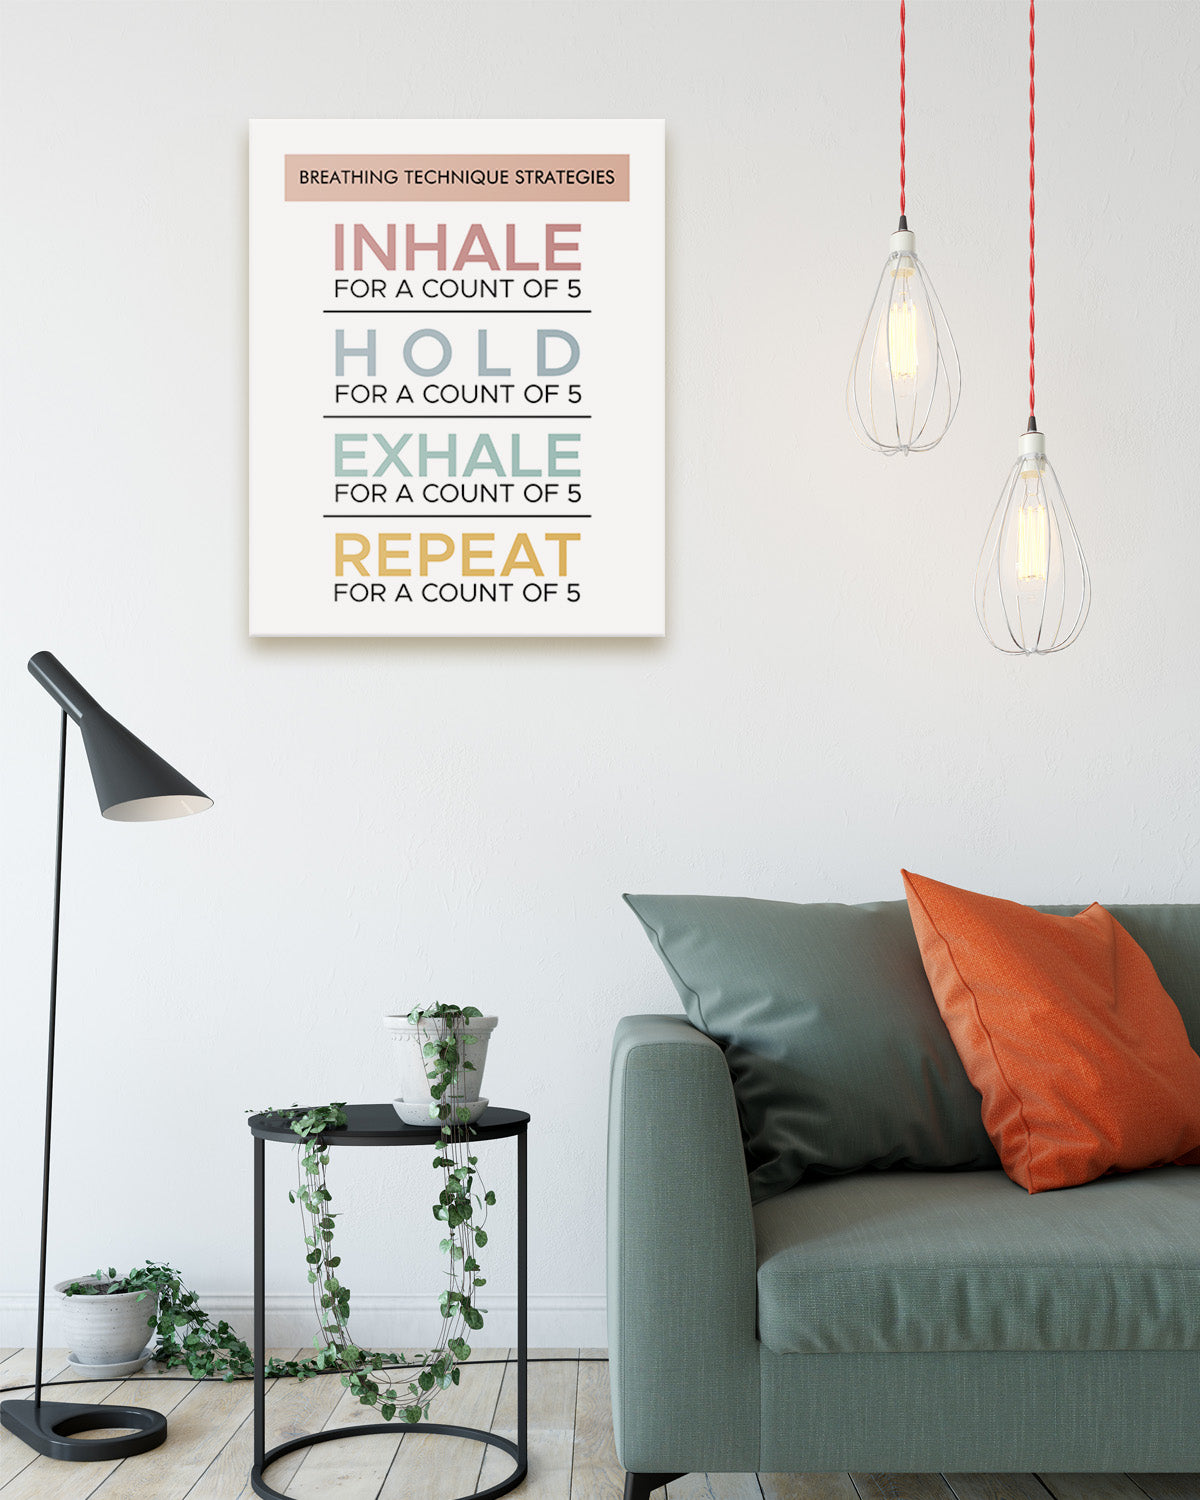 Govivo Breathing Technique Strategies - Wall Decor for Therapy Office - Mindfulness Wall Decor - Counseling Office - Mental Health Wall Art - School Psychologist, Therapist